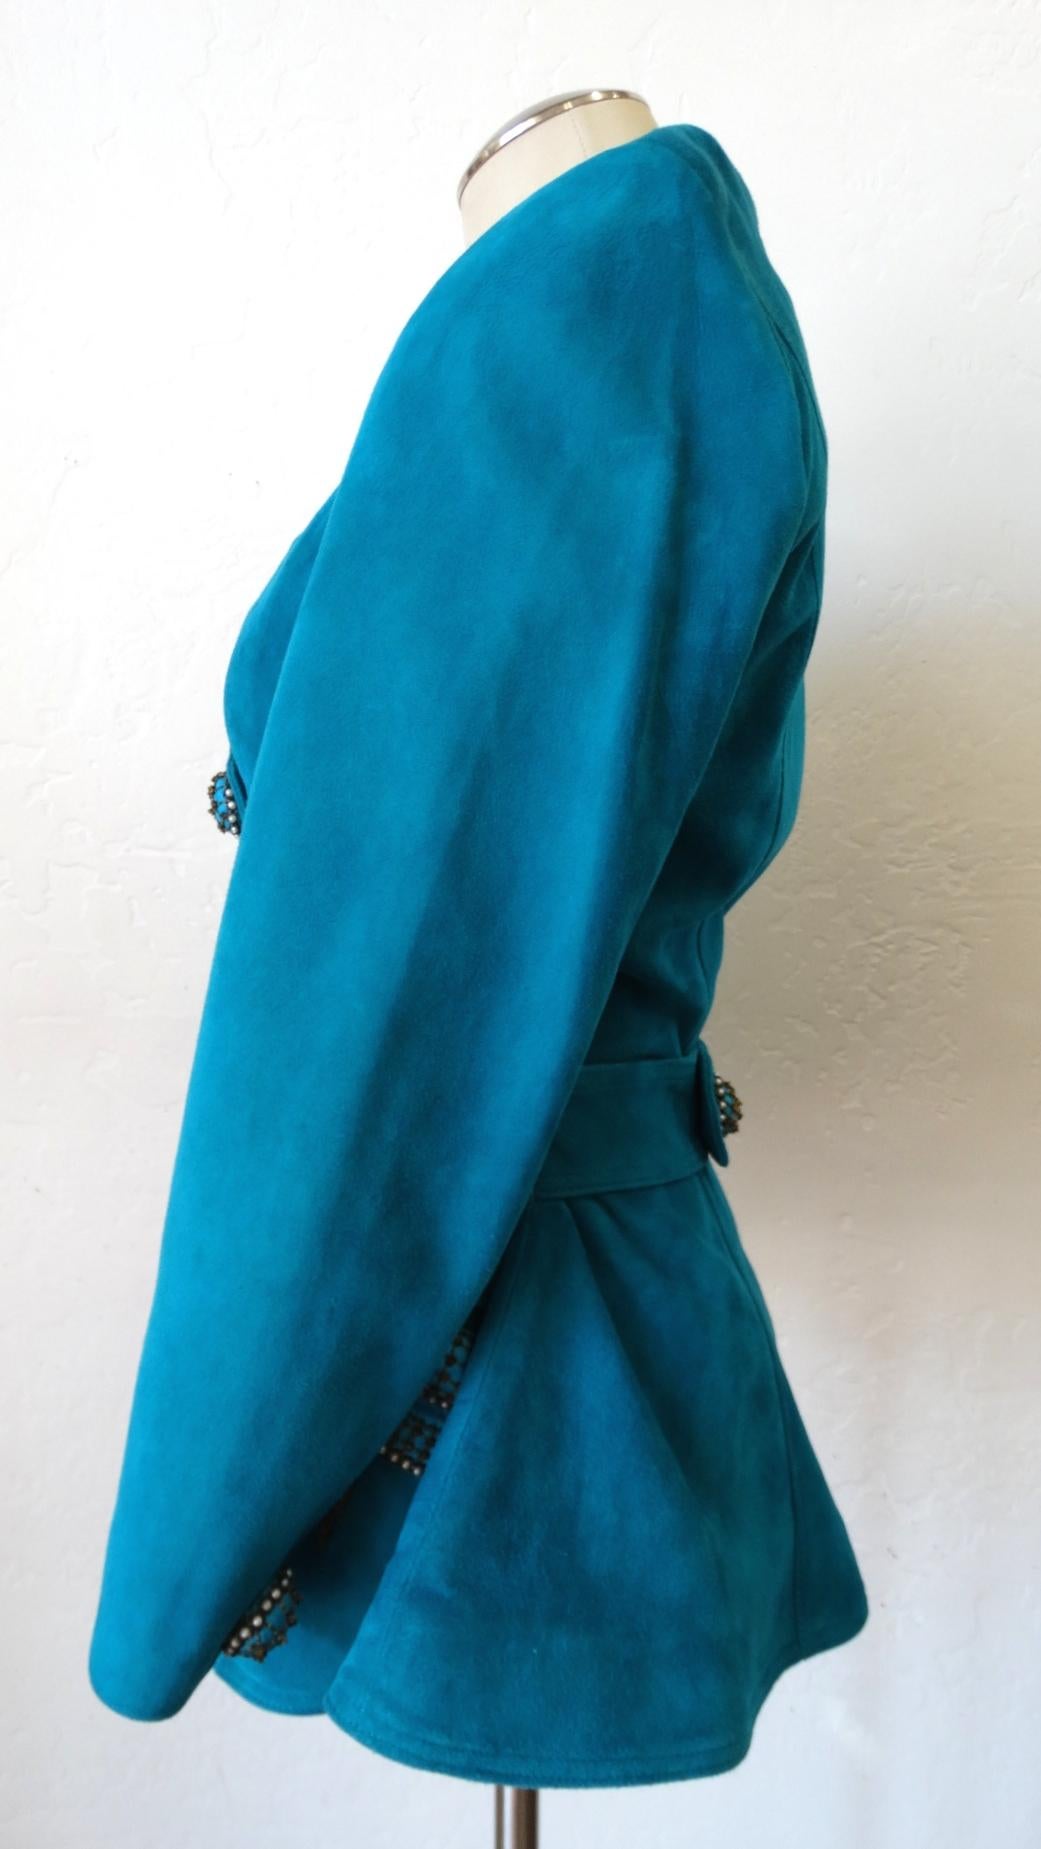 This Jacket Is Just Waiting To Be Worn! Circa 1980s, this Jean Claude teal suede leather double breasted jacket features a flattering sweetheart neckline and is decorated with embellished buttons and bows. The snap closure button and bow accents